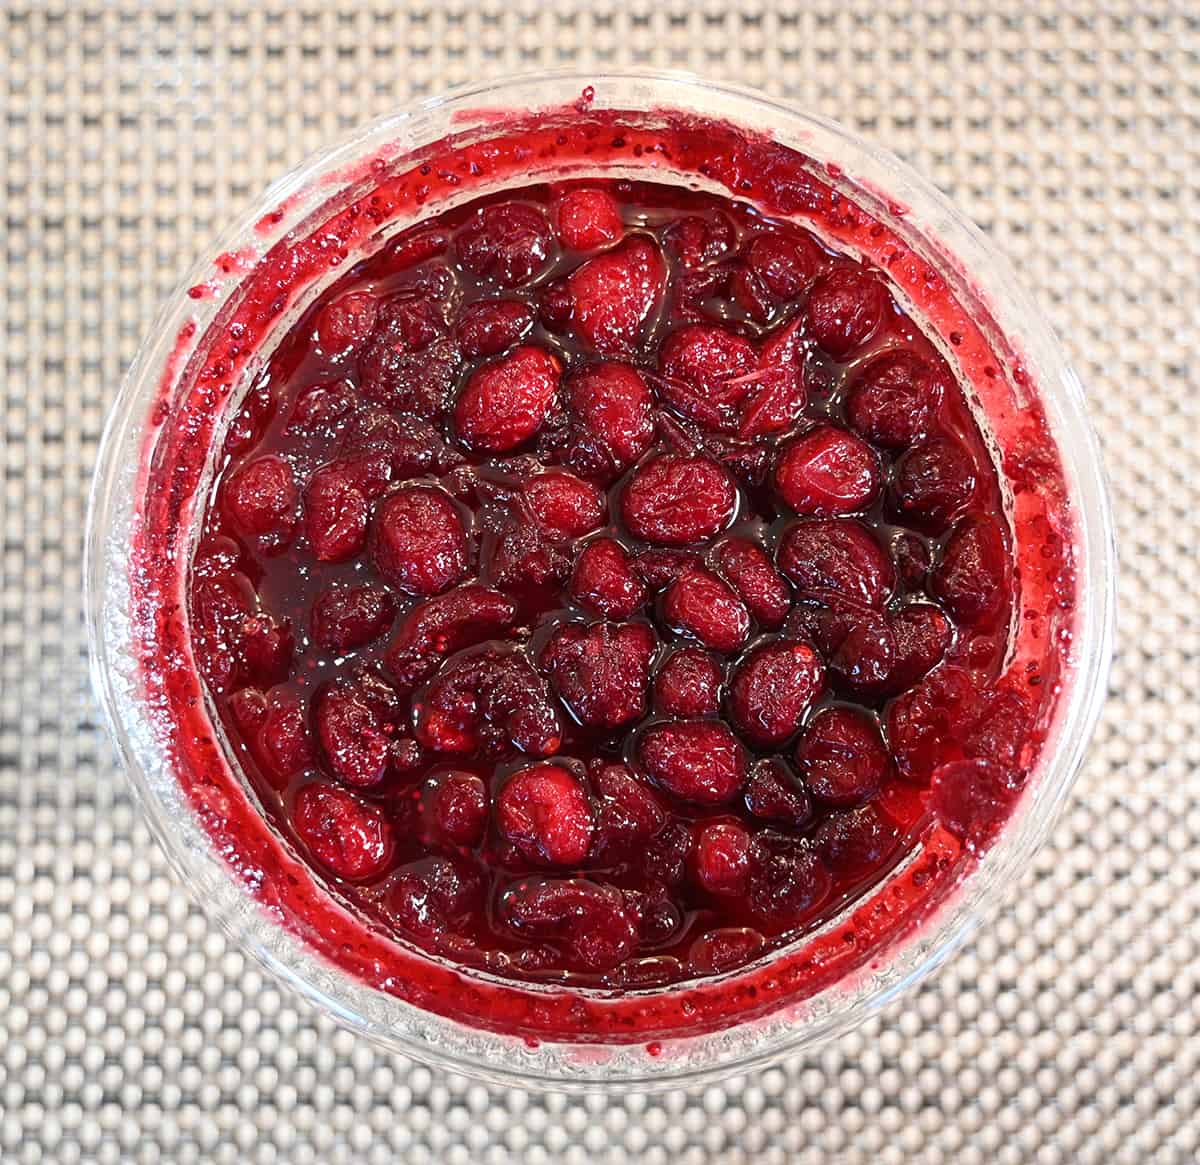 Top down image of an opened cranberry sauce container showing what the cranberry sauce looks like.